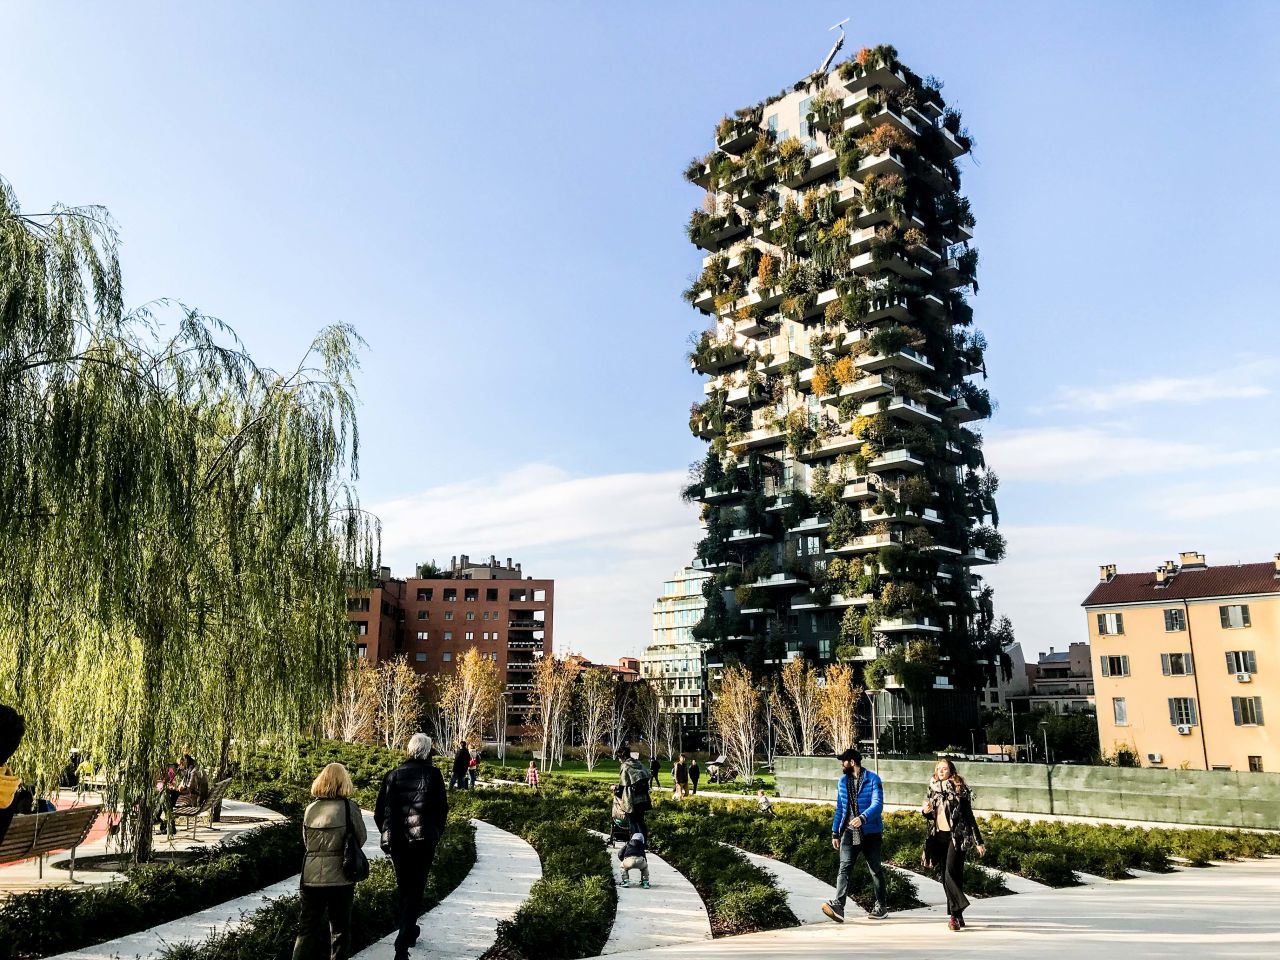 Bosco Verticale translates to Vertical Forest. It's one of the most intensively green facades you'll find anywhere in the world.